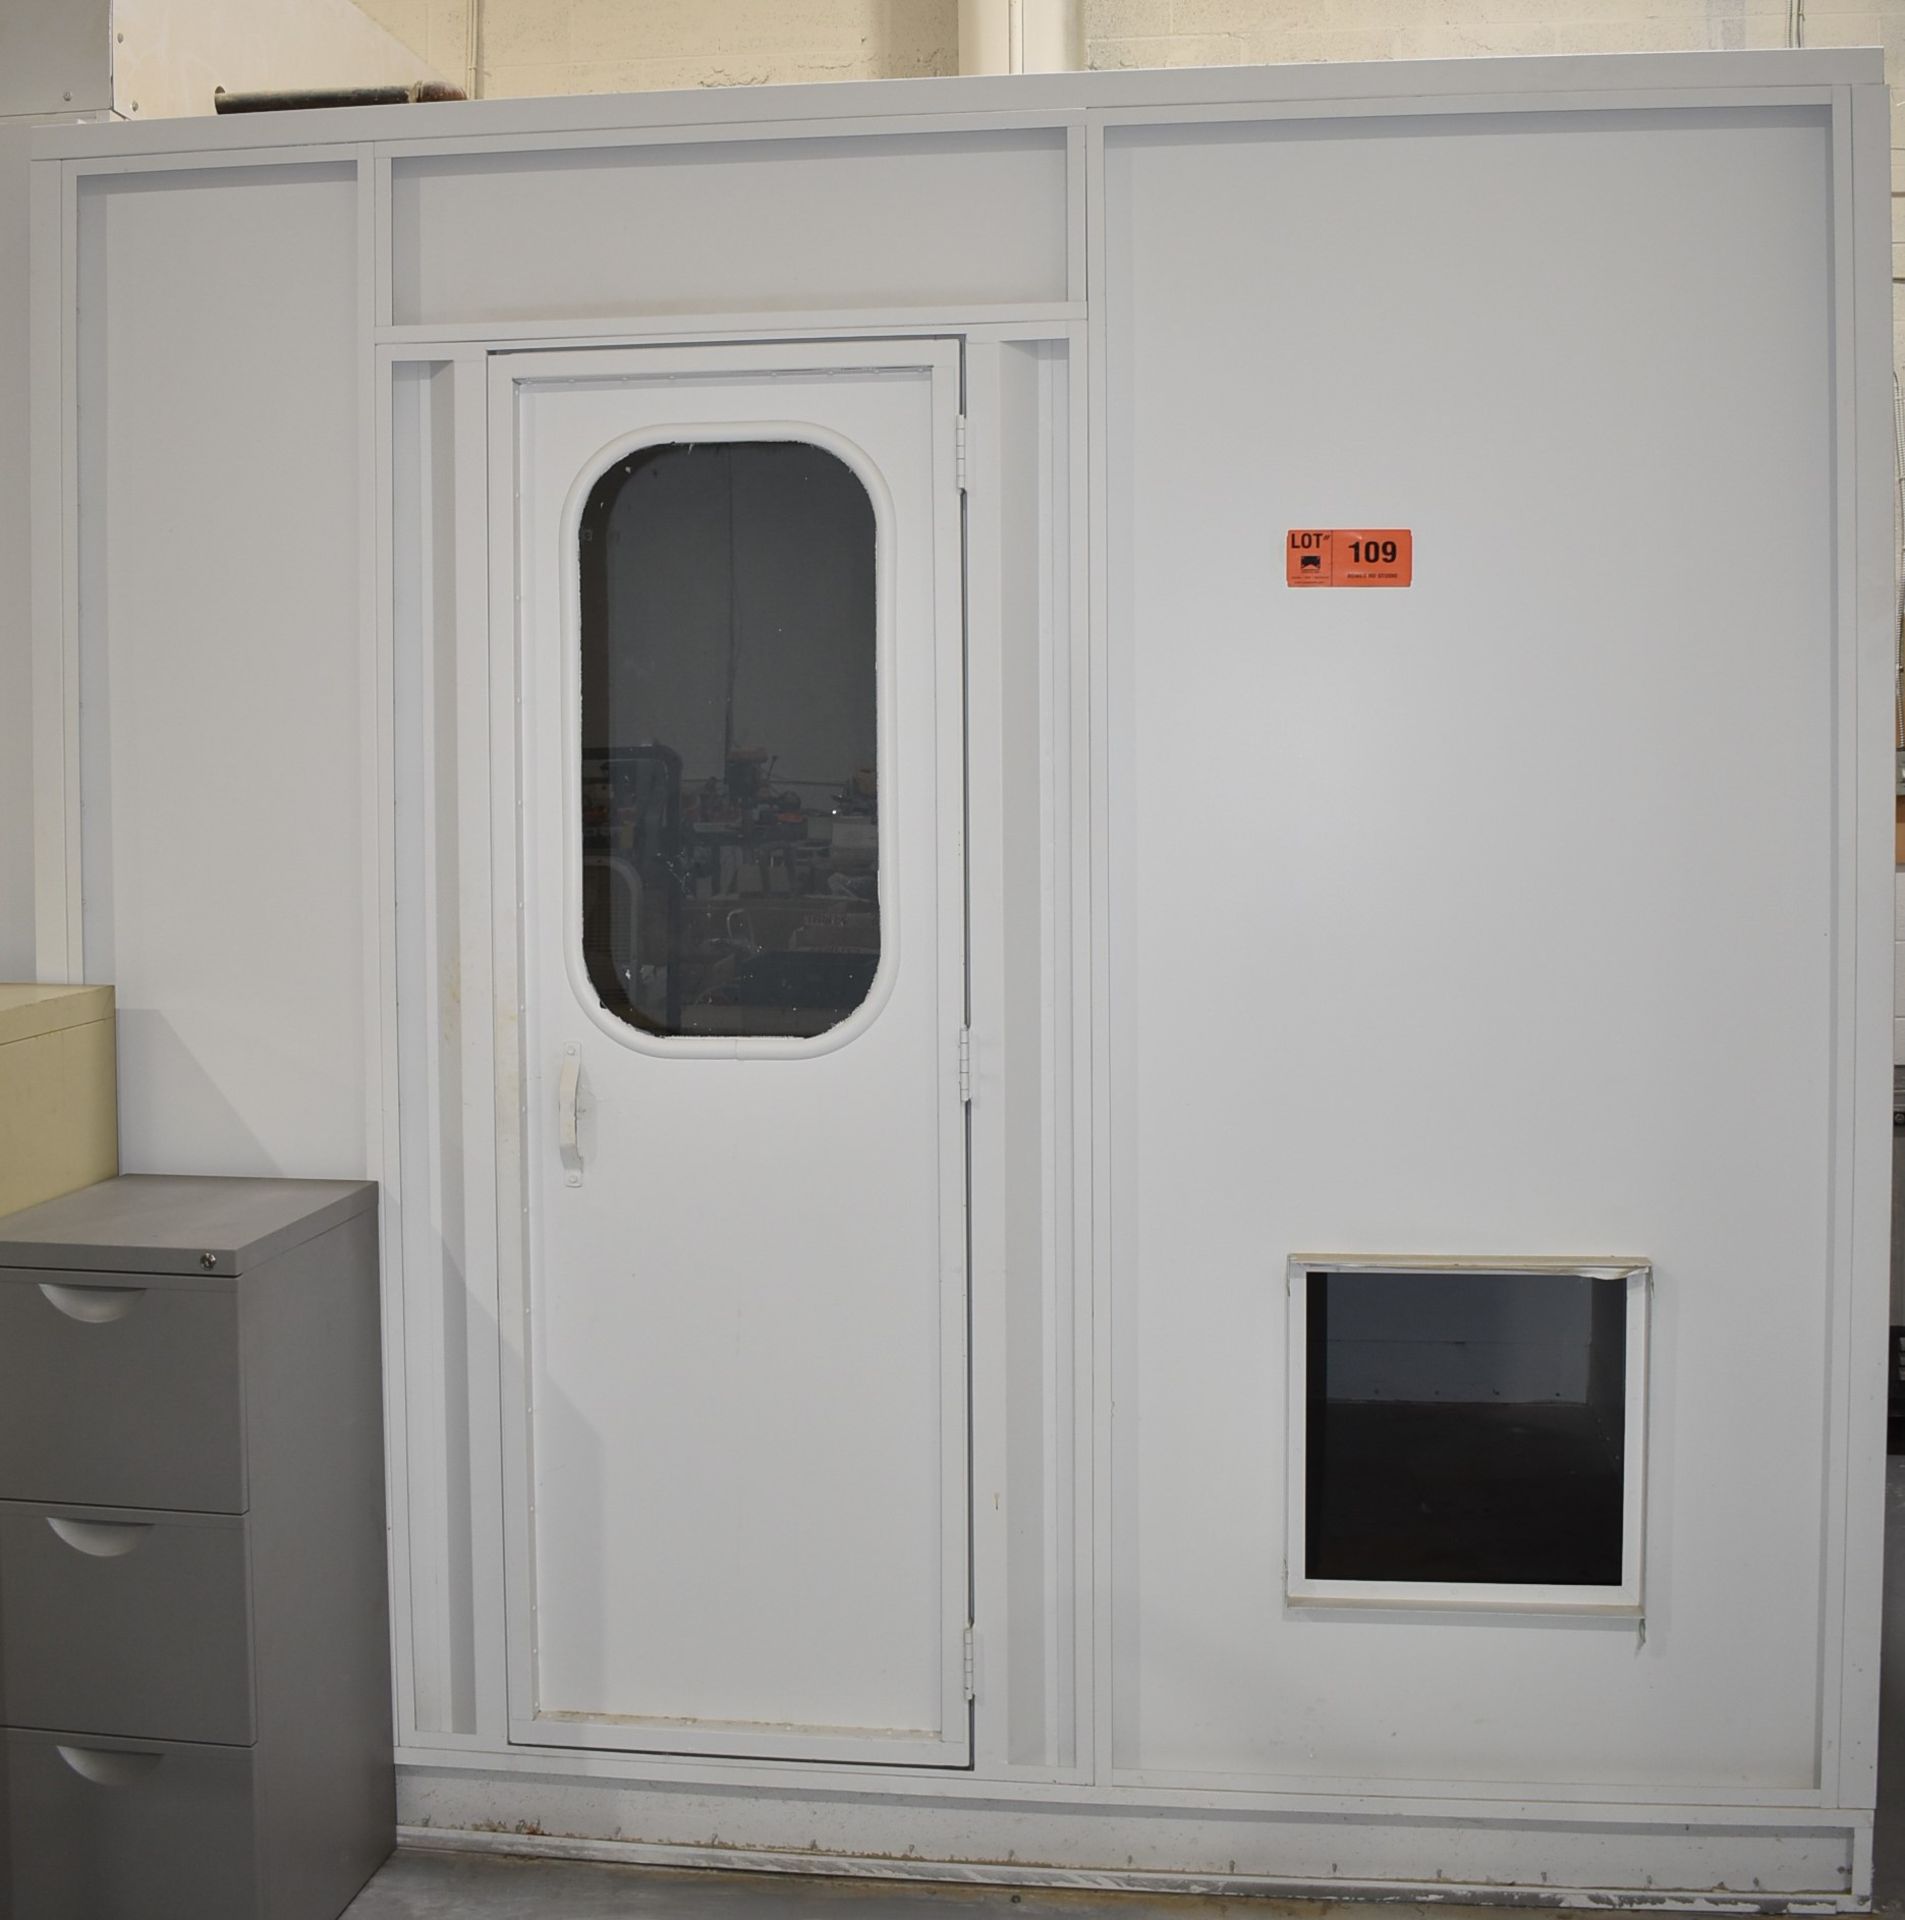 UNITED SPRAY BOOTHS 108" X 108" PAINT SPRAY BOOTH WITH 24" X 79" ACCESS DOOR, FIRE SUPPRESSION, S/